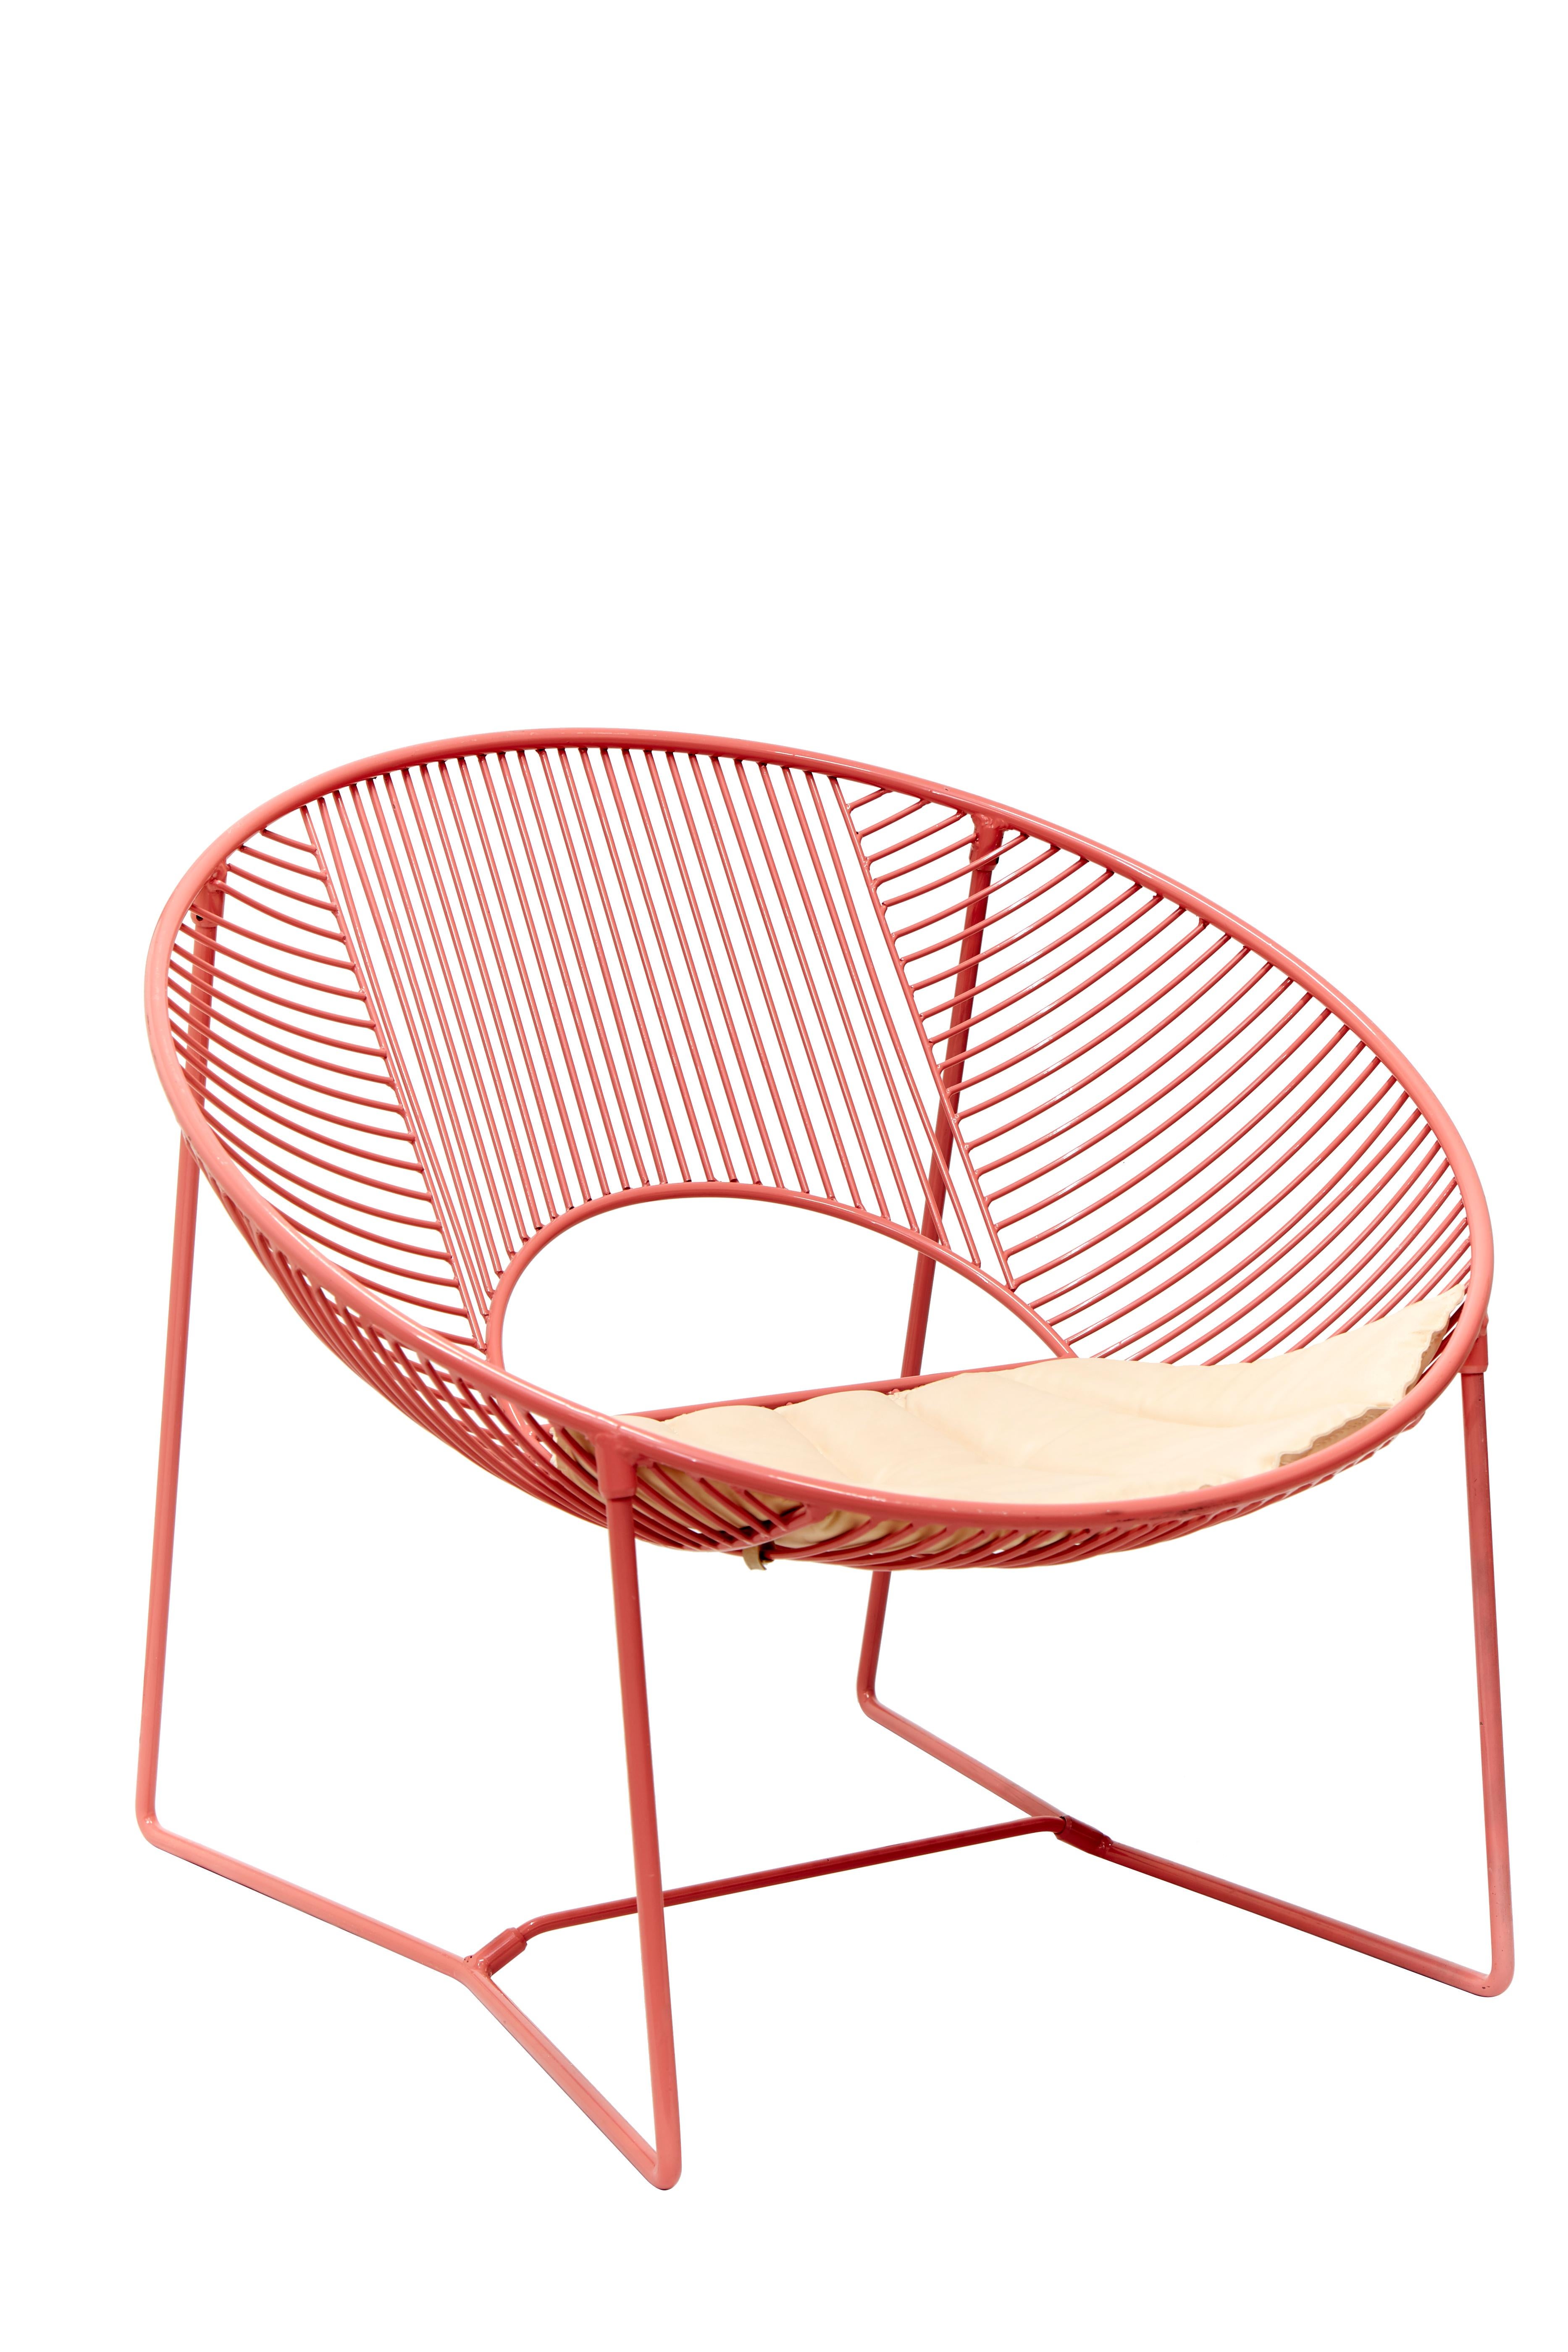 This outdoor lounge chair is a unique creation by León León Design from Mexico City.
It features a solid powder-coated steel structure and can be used either indoor or outdoor.

Handcrafted in small batches, every chair comes with a hand-numbered